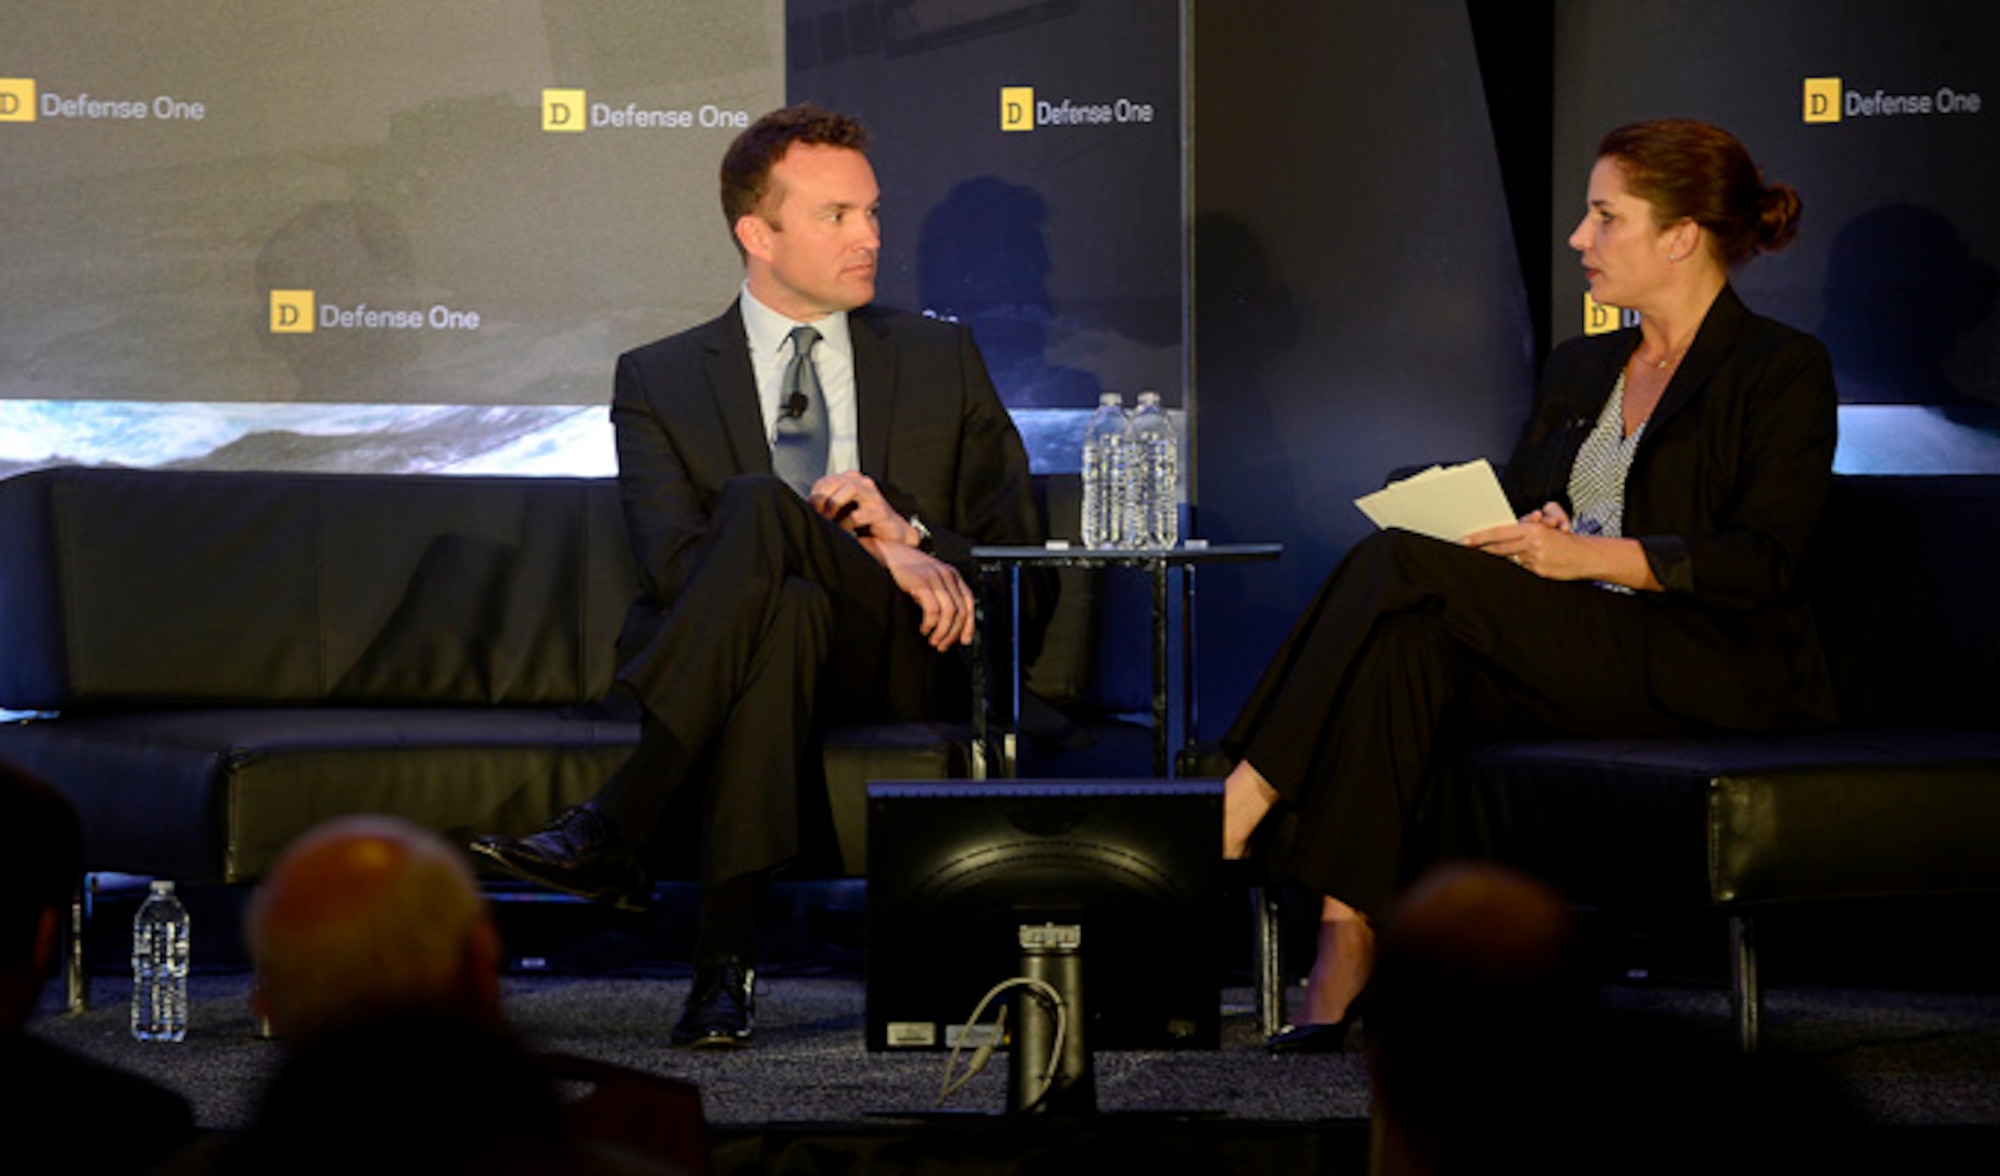 Acting Secretary of the Air Force Eric Fanning responds to Stephanie Gaskell, associate editor and senior reporter for Defense One, during the Inaugural Defense One Summit Nov. 14, 2013, in Washington, D.C. The summit brought more than 400 members of the national security community and media together to discuss the future of the defense landscape.